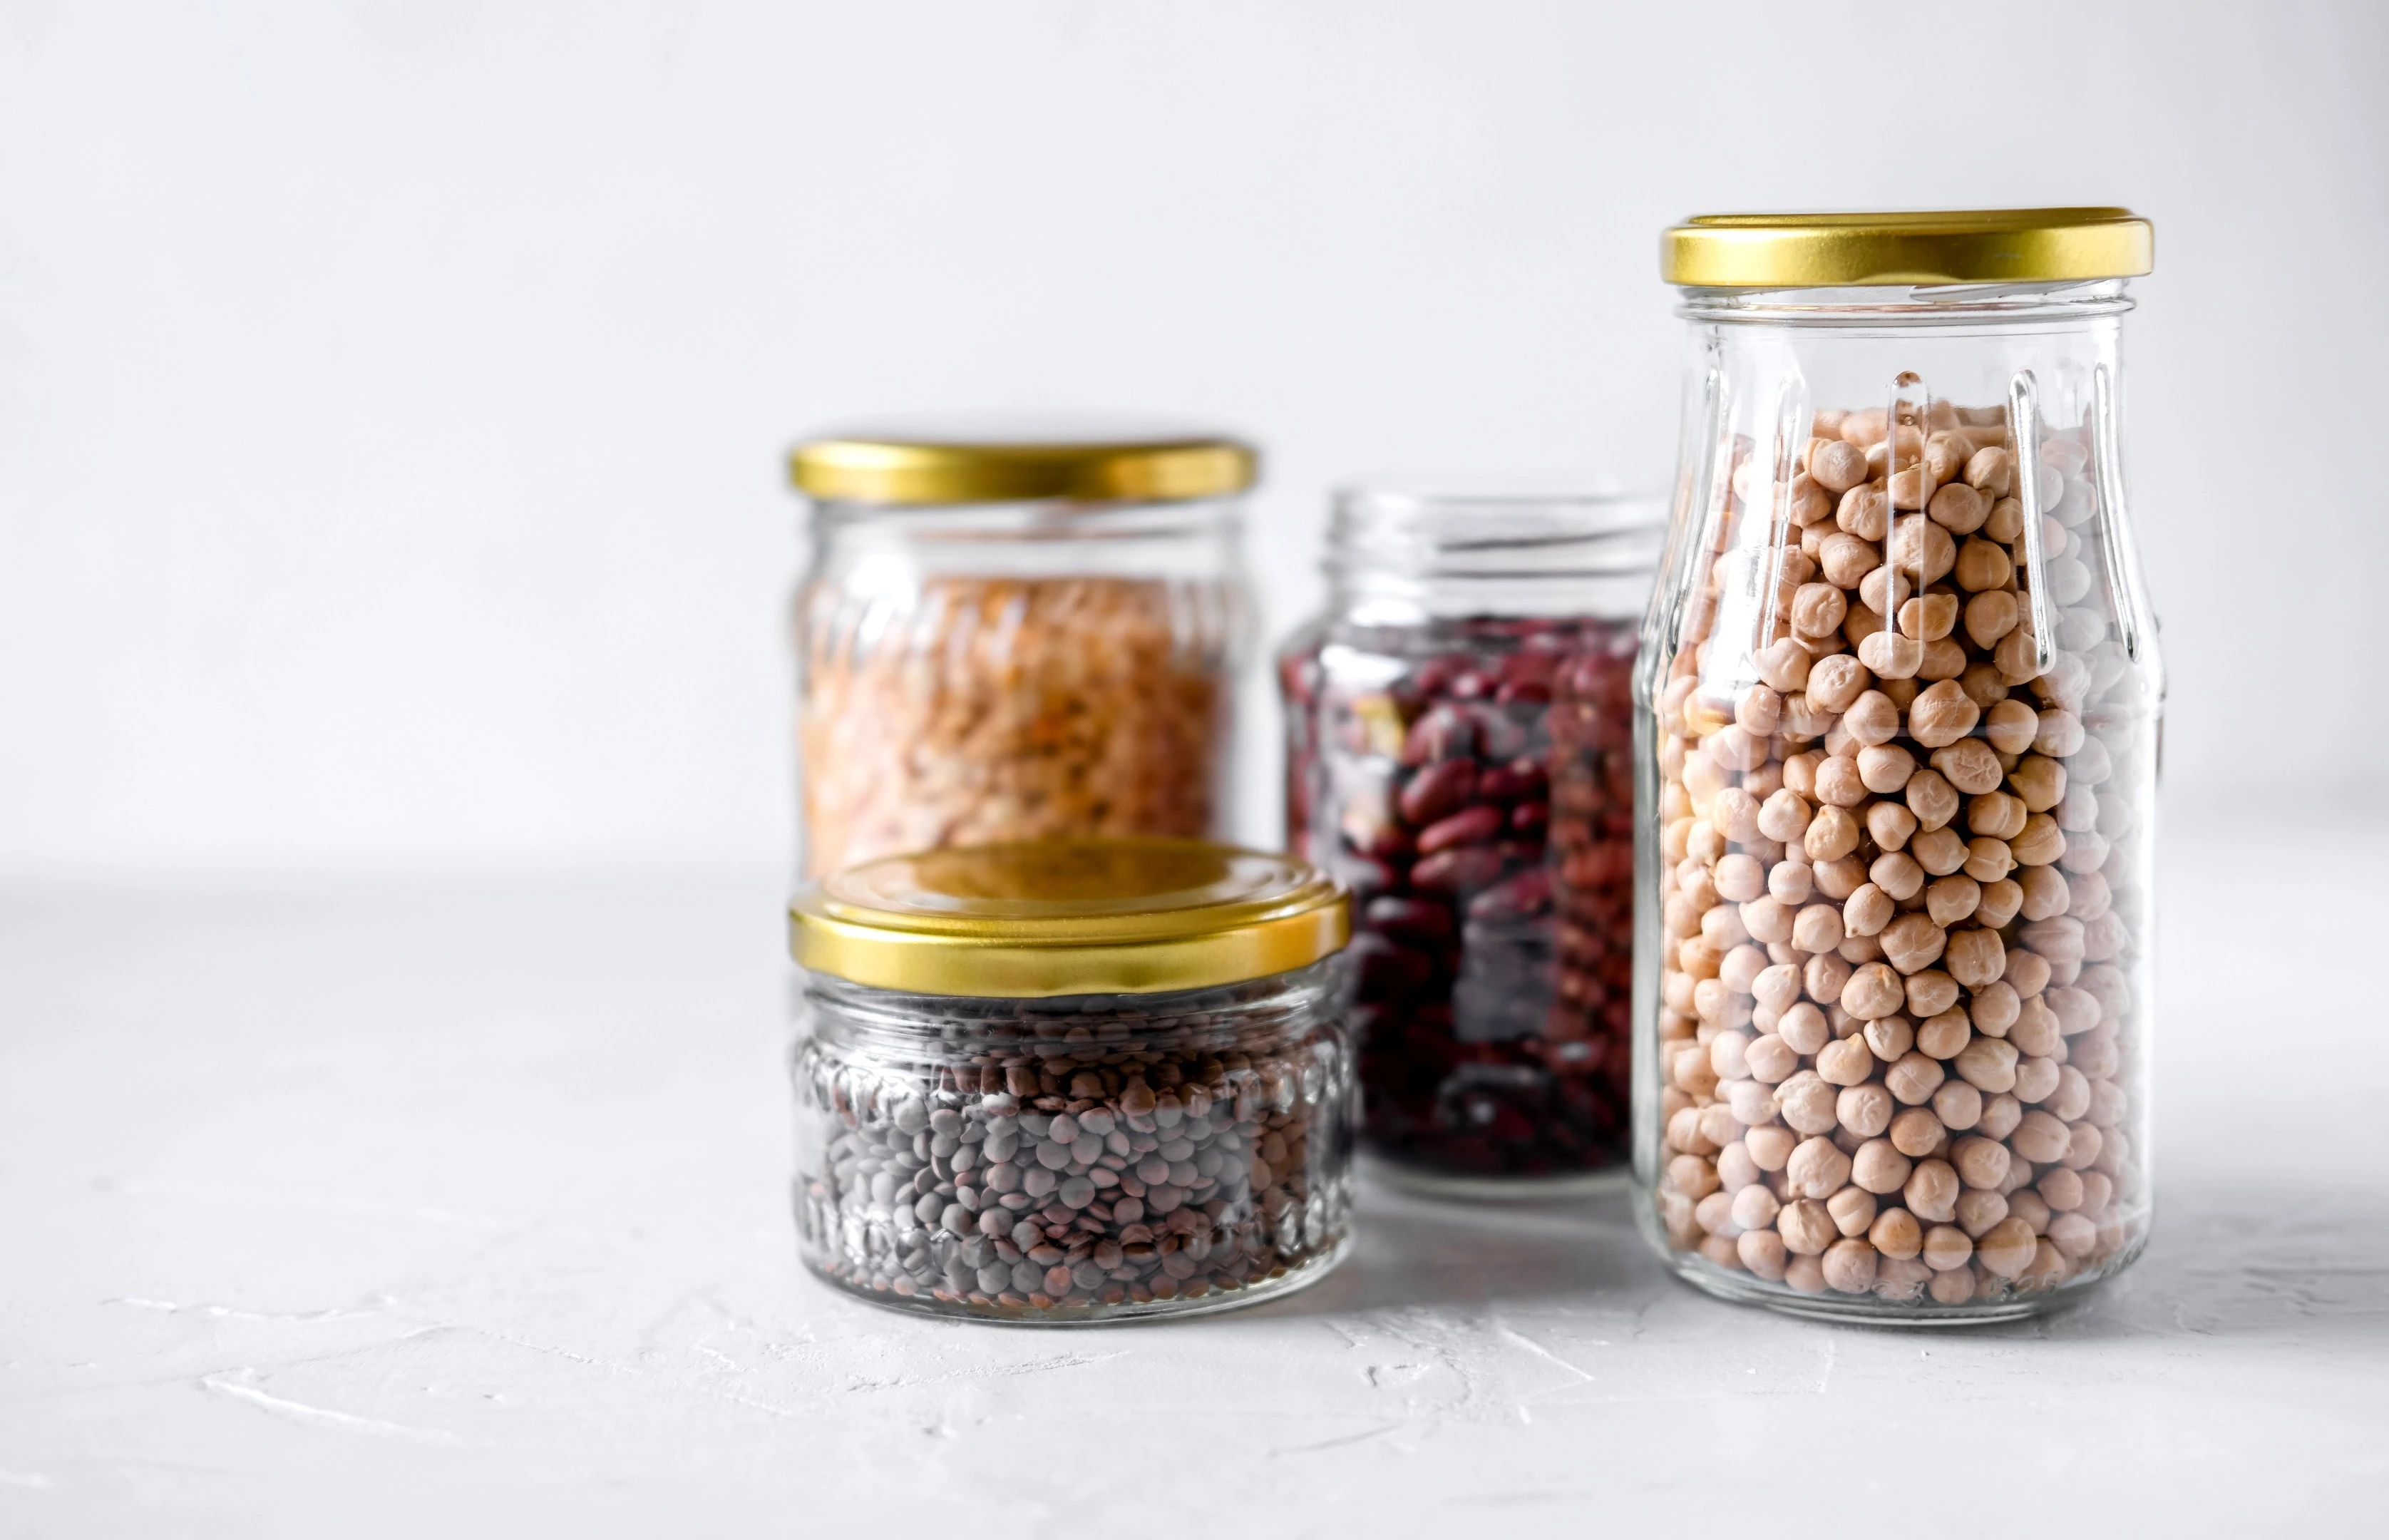 Legumes chickpeas and lentils in glass jars